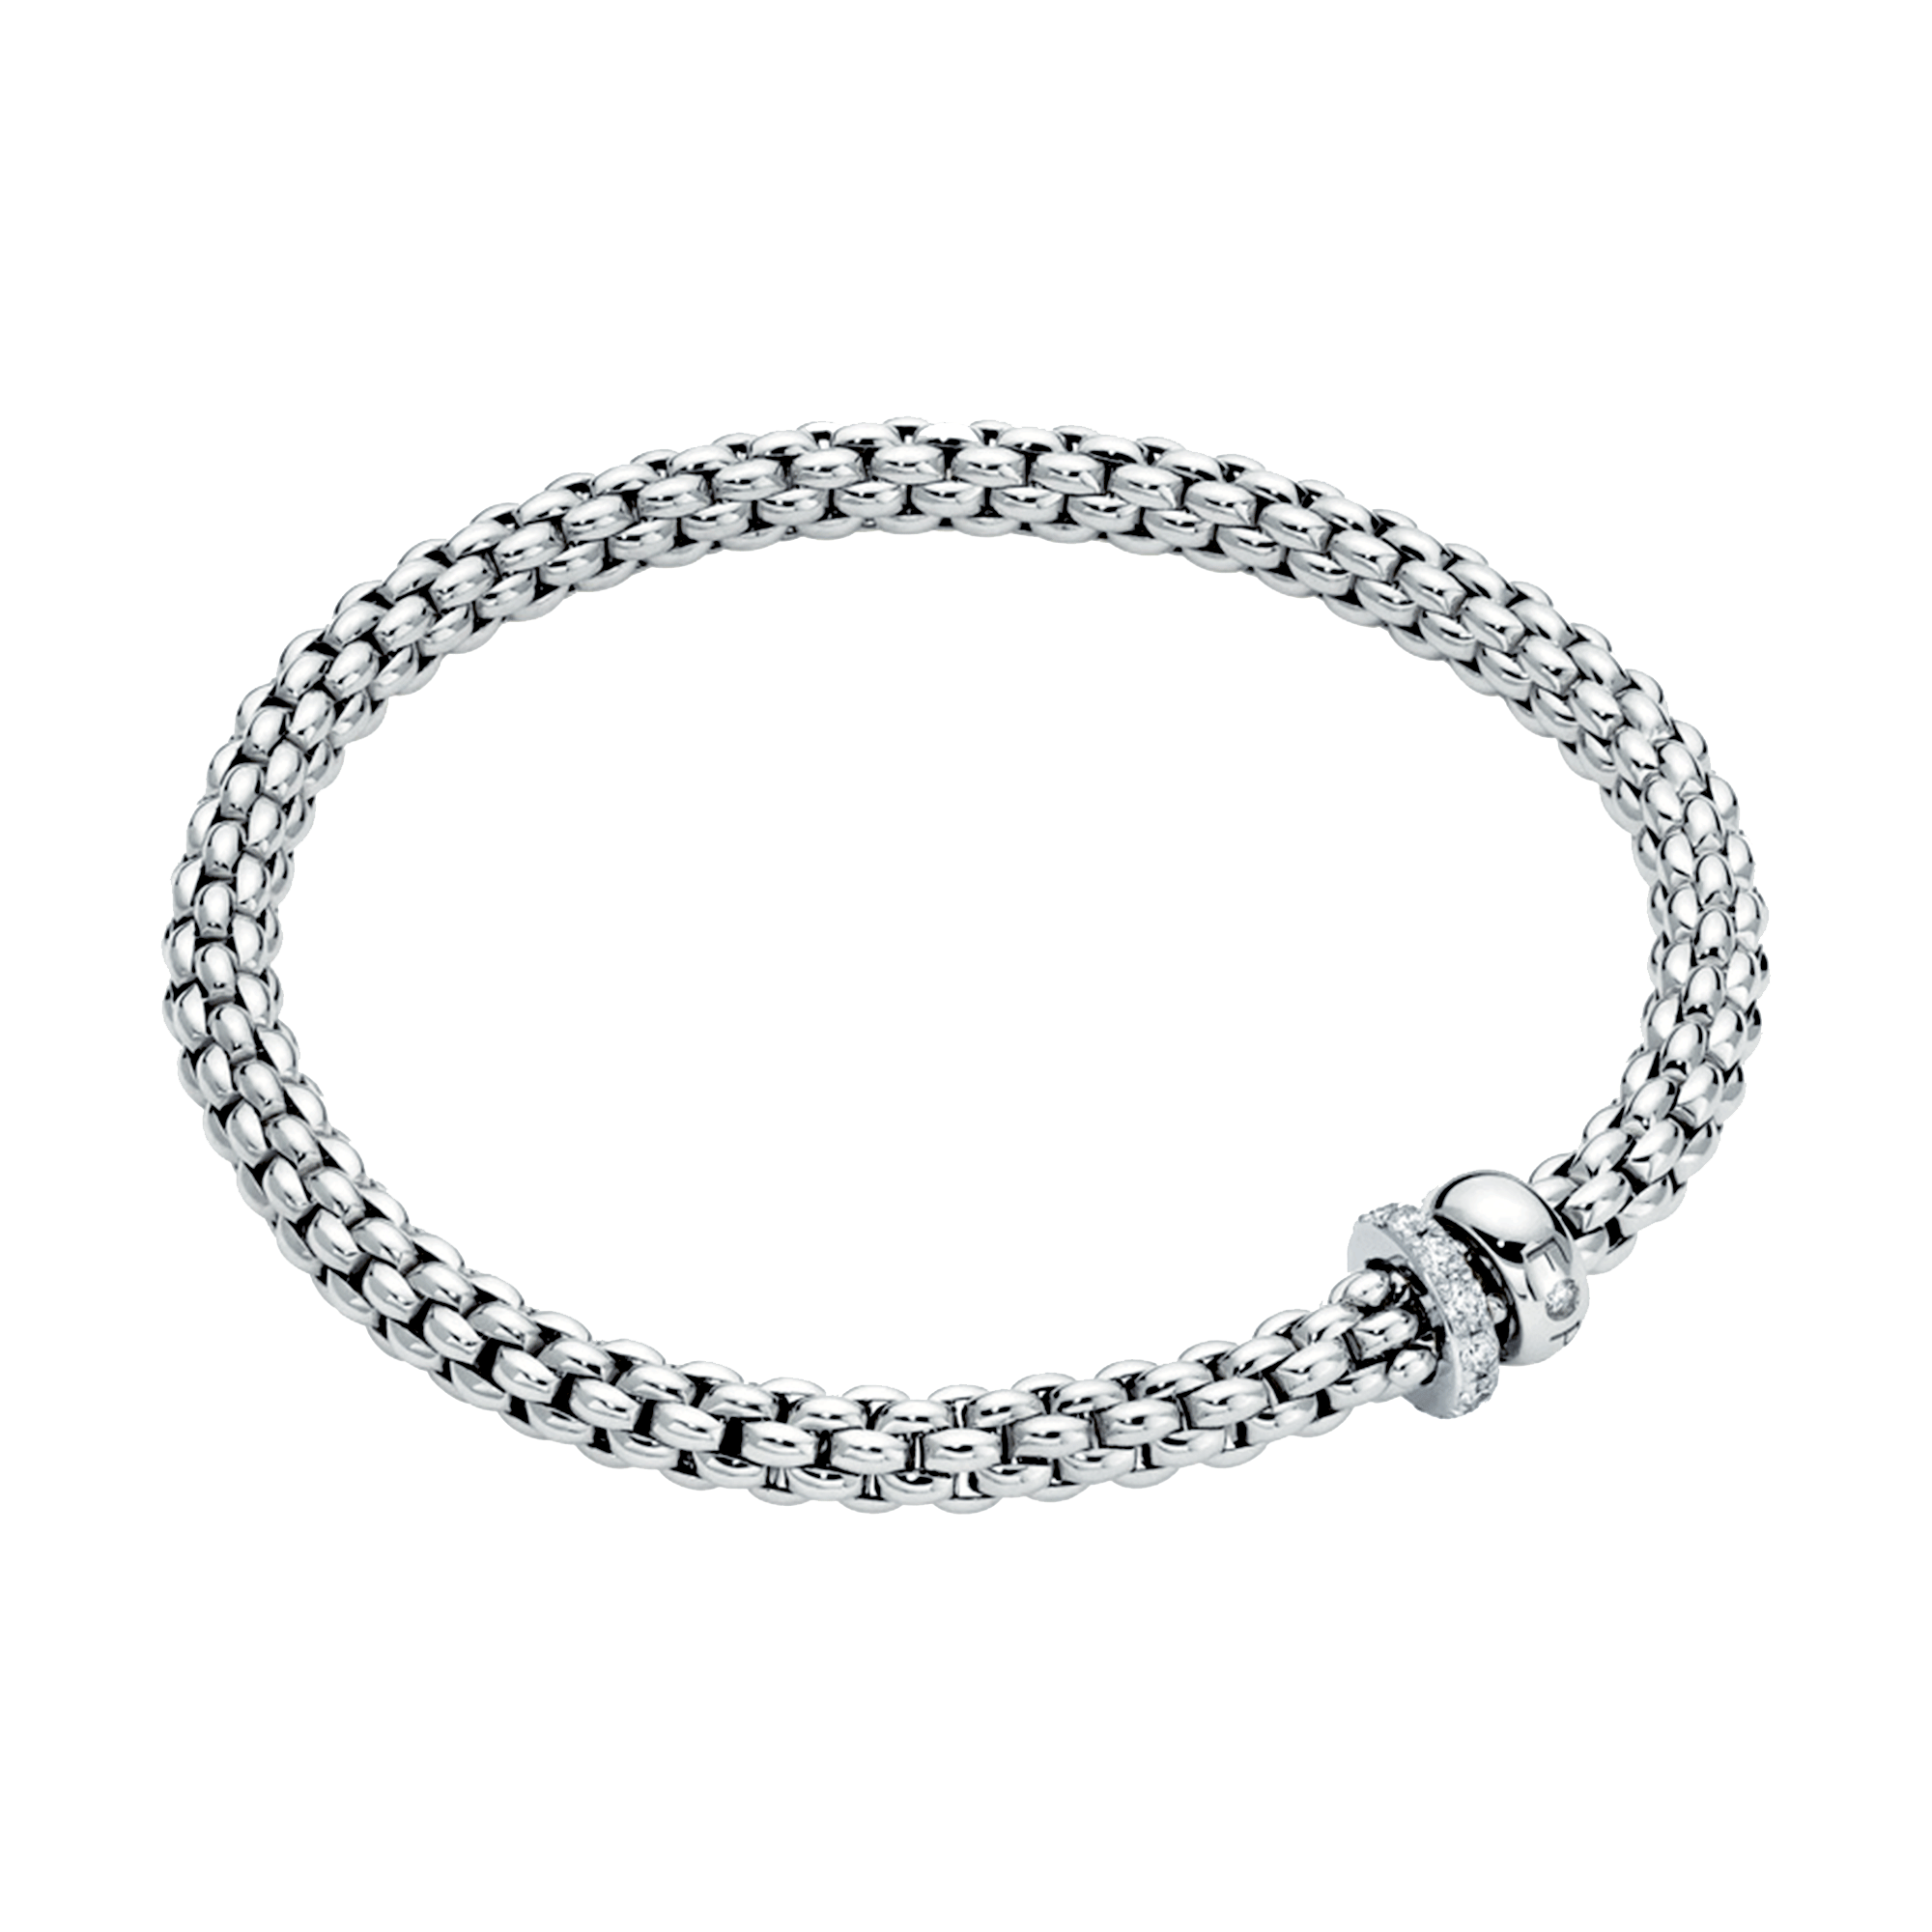 Solo 18ct White Gold Bracelet With Pave Diamond Set And Polished Rondels